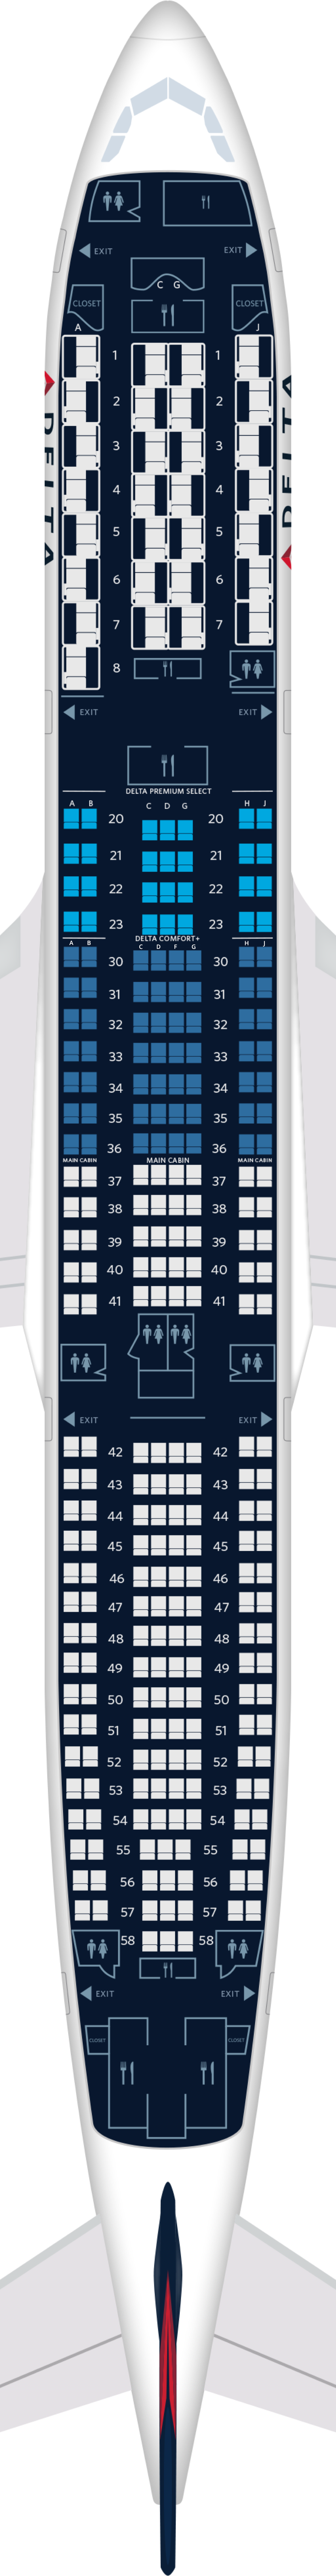 Airbus A330 900neo Seat Maps Specs And Amenities Delta Air Lines